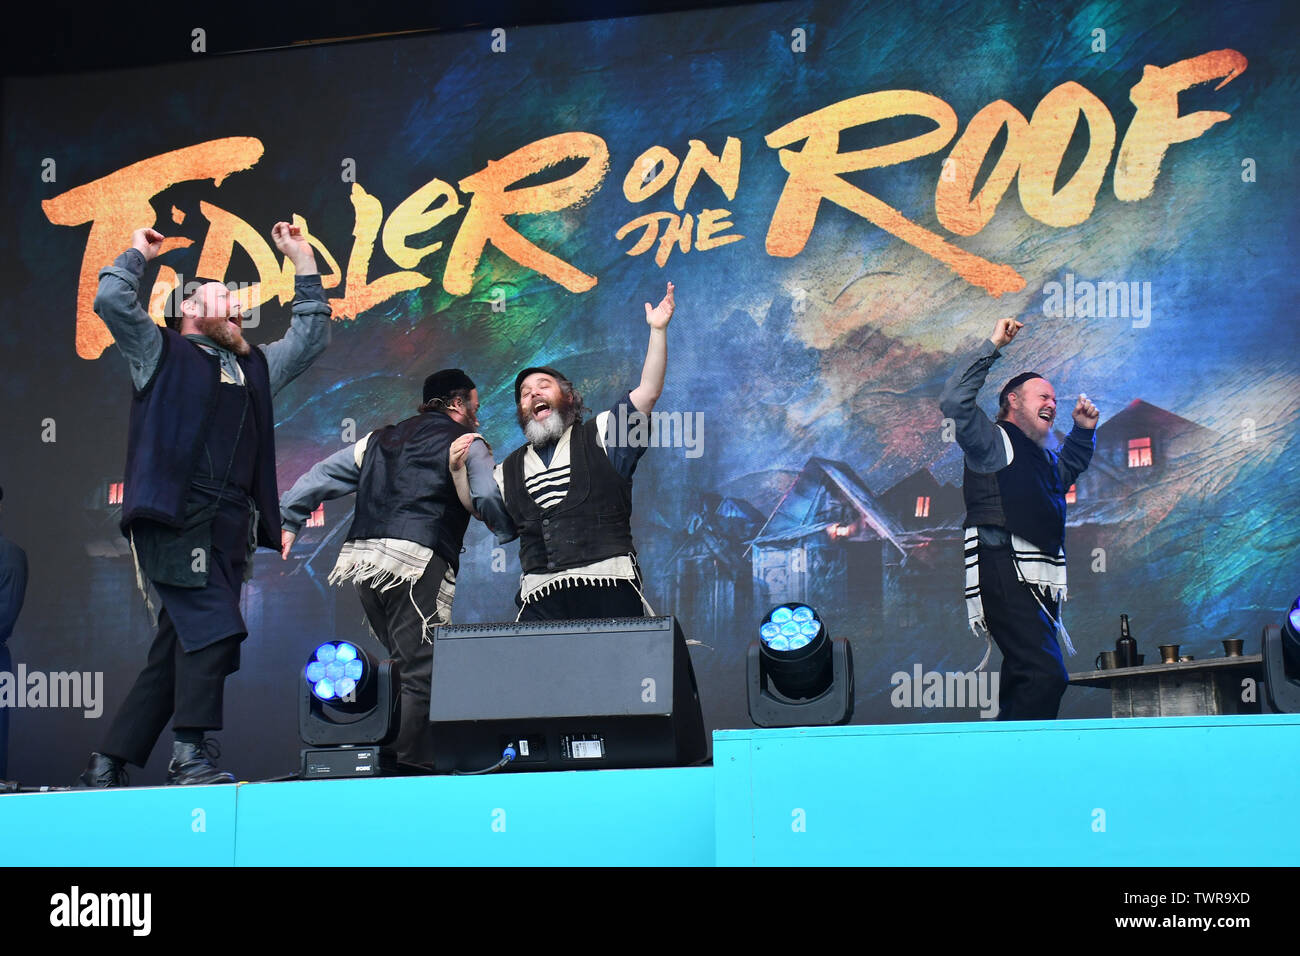 Fiddler on the Roof performs at West End Live 2019 in Trafalgar Square, on  22 June 2019, London, UK Stock Photo - Alamy